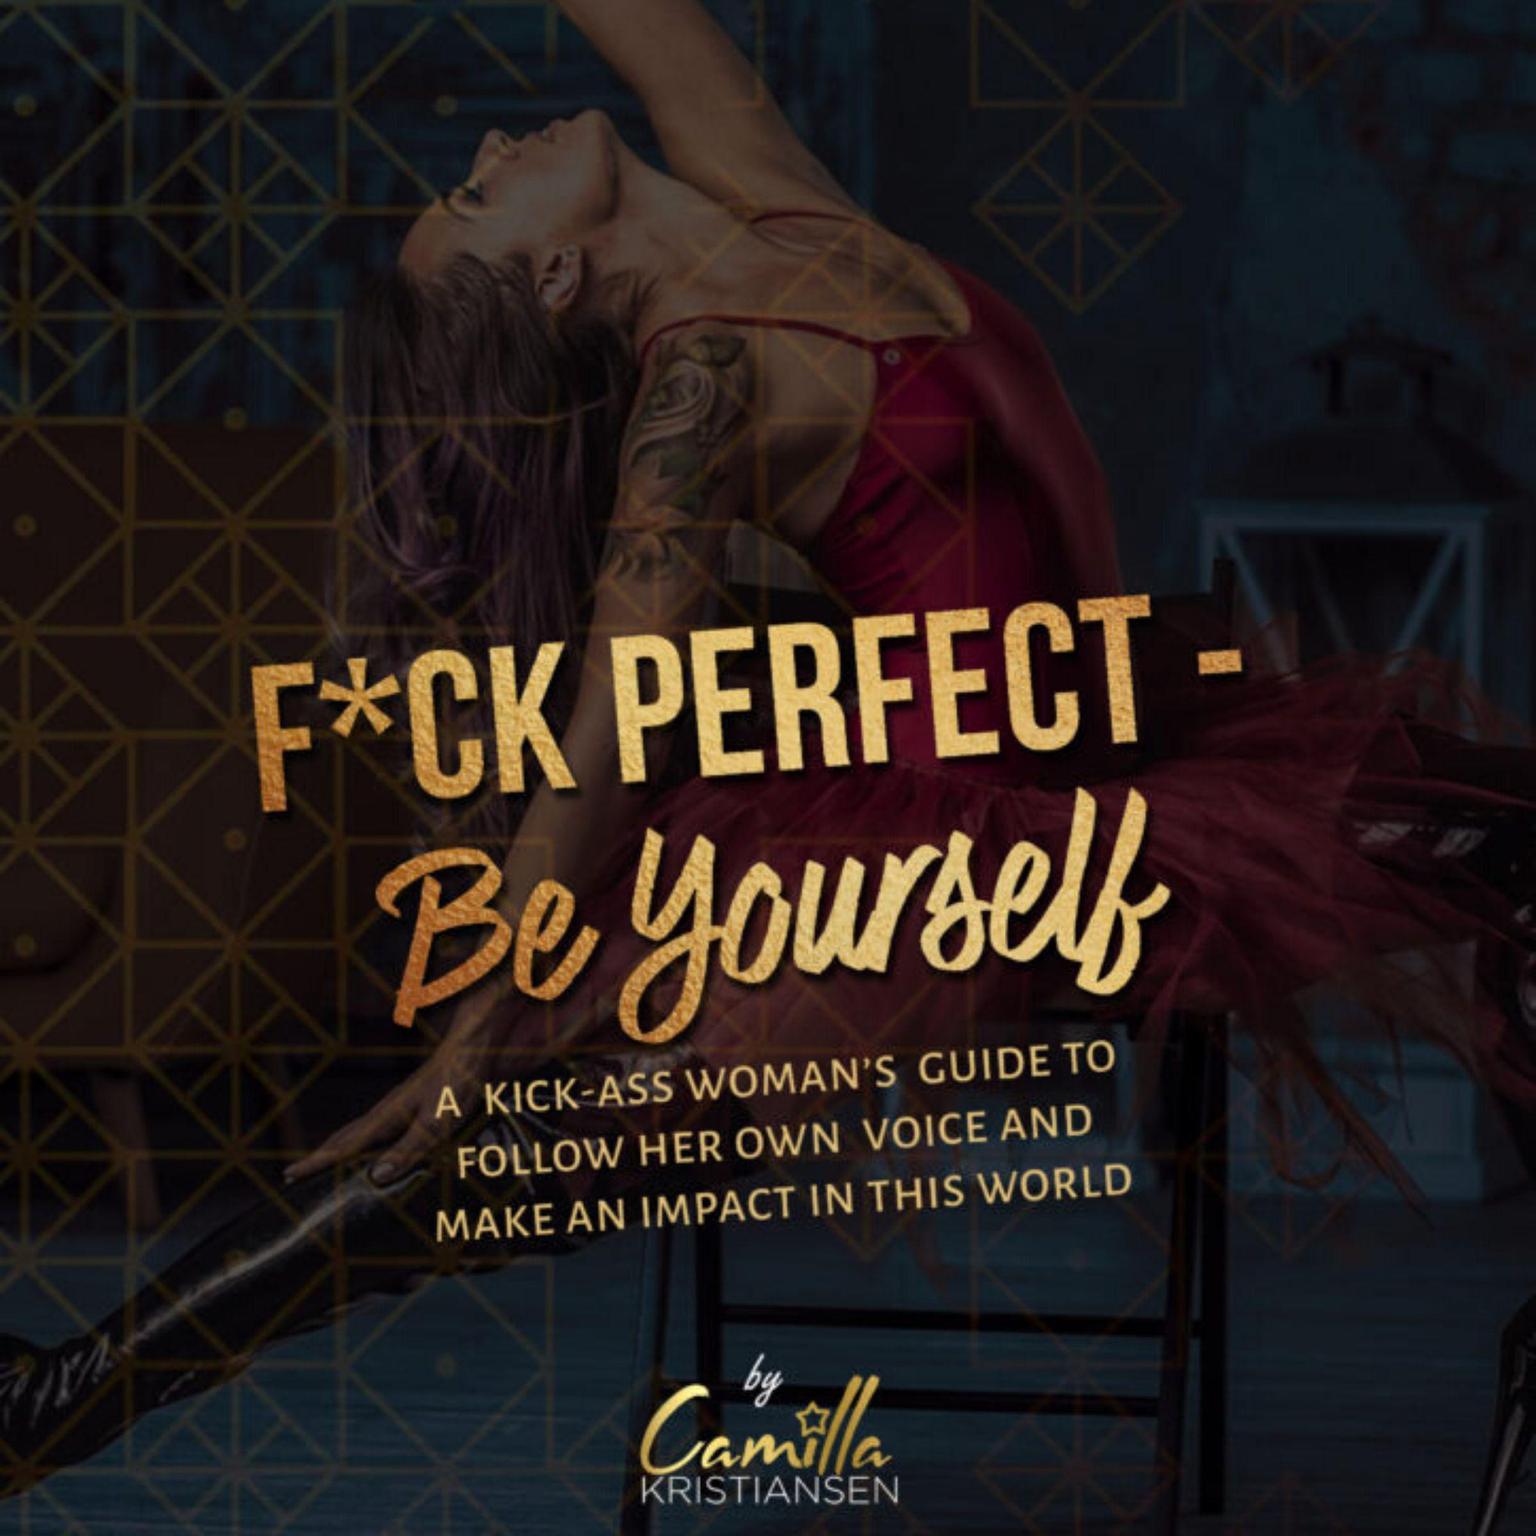 Fuck perfect - be yourself!: A kick-ass womans guide to follow her own voice and make an impact in this world. Audiobook, by Camilla Kristiansen